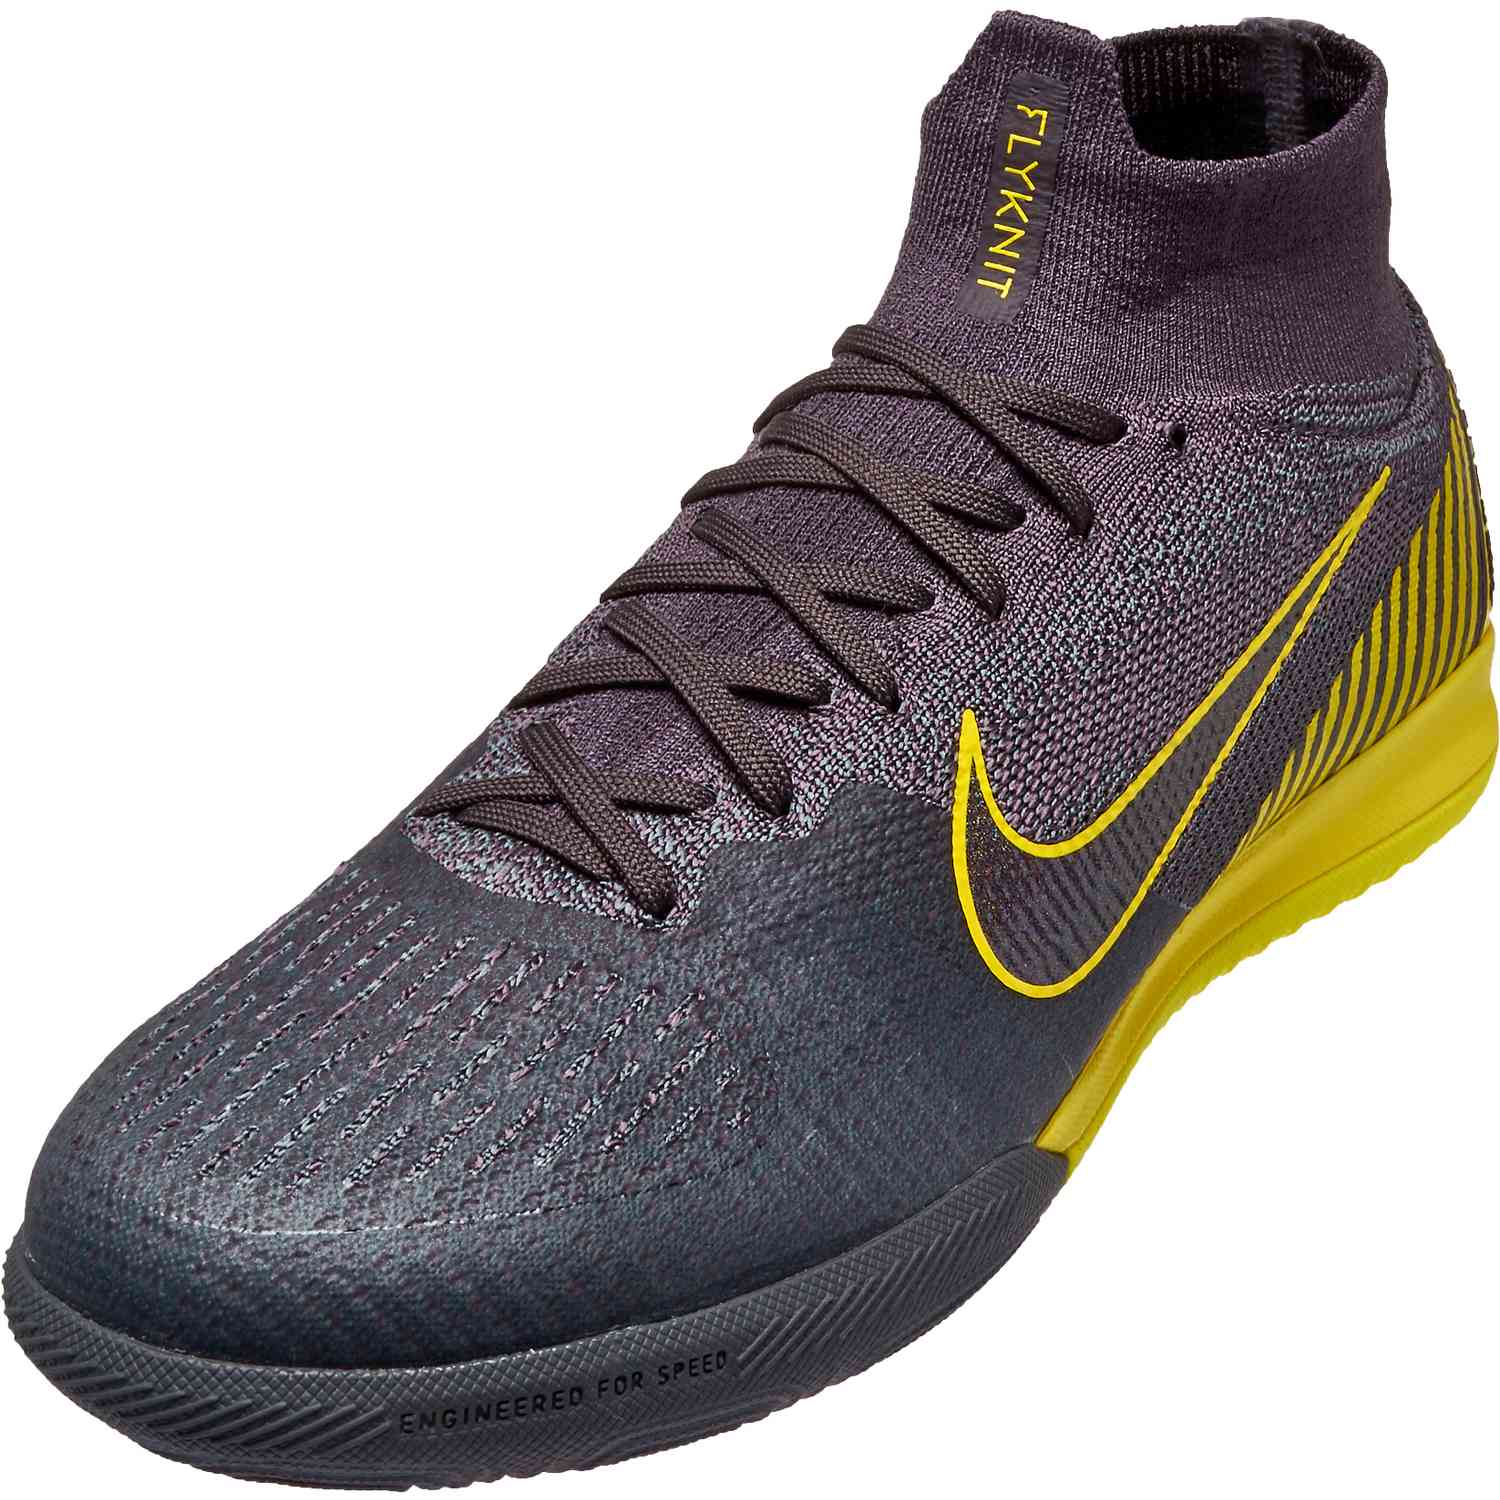 nike outdoor soccer shoes